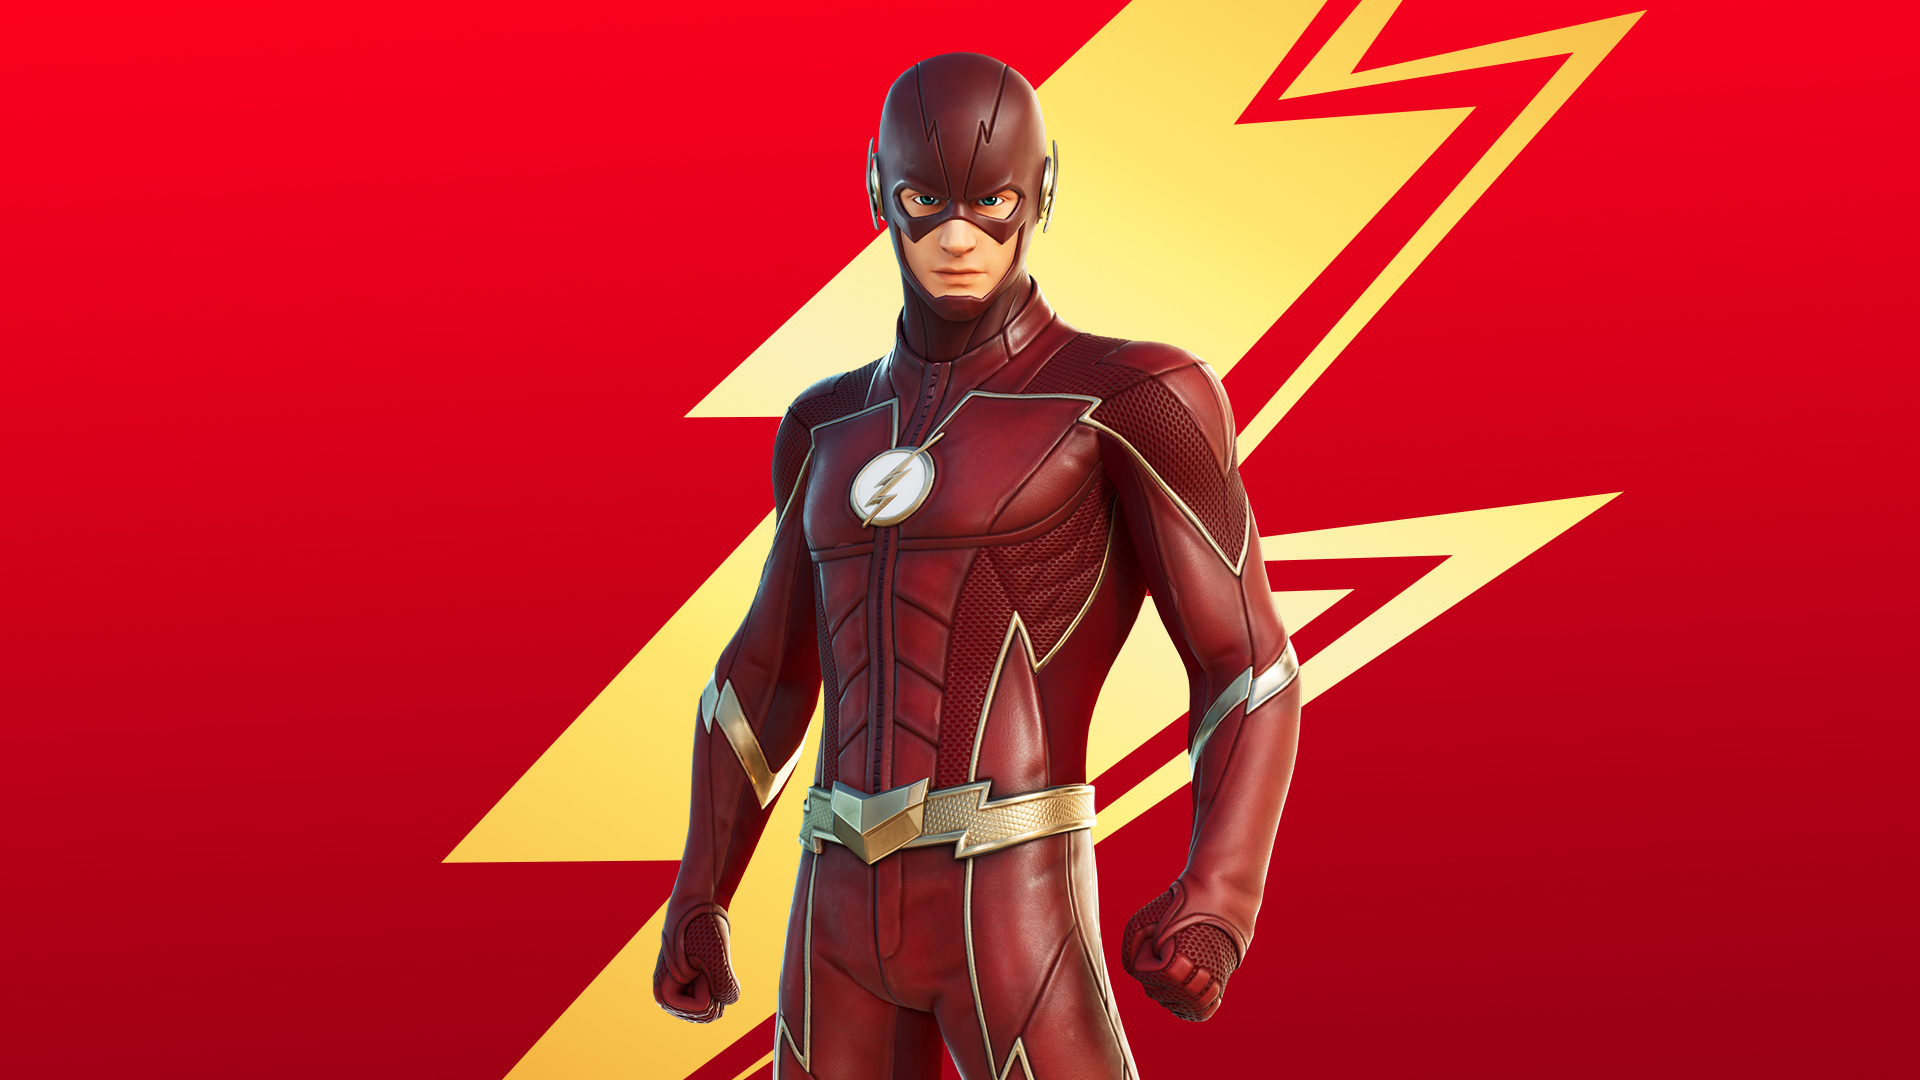 The Flash HD Wallpapers  Top Best Ultra HD The Flash Backgrounds